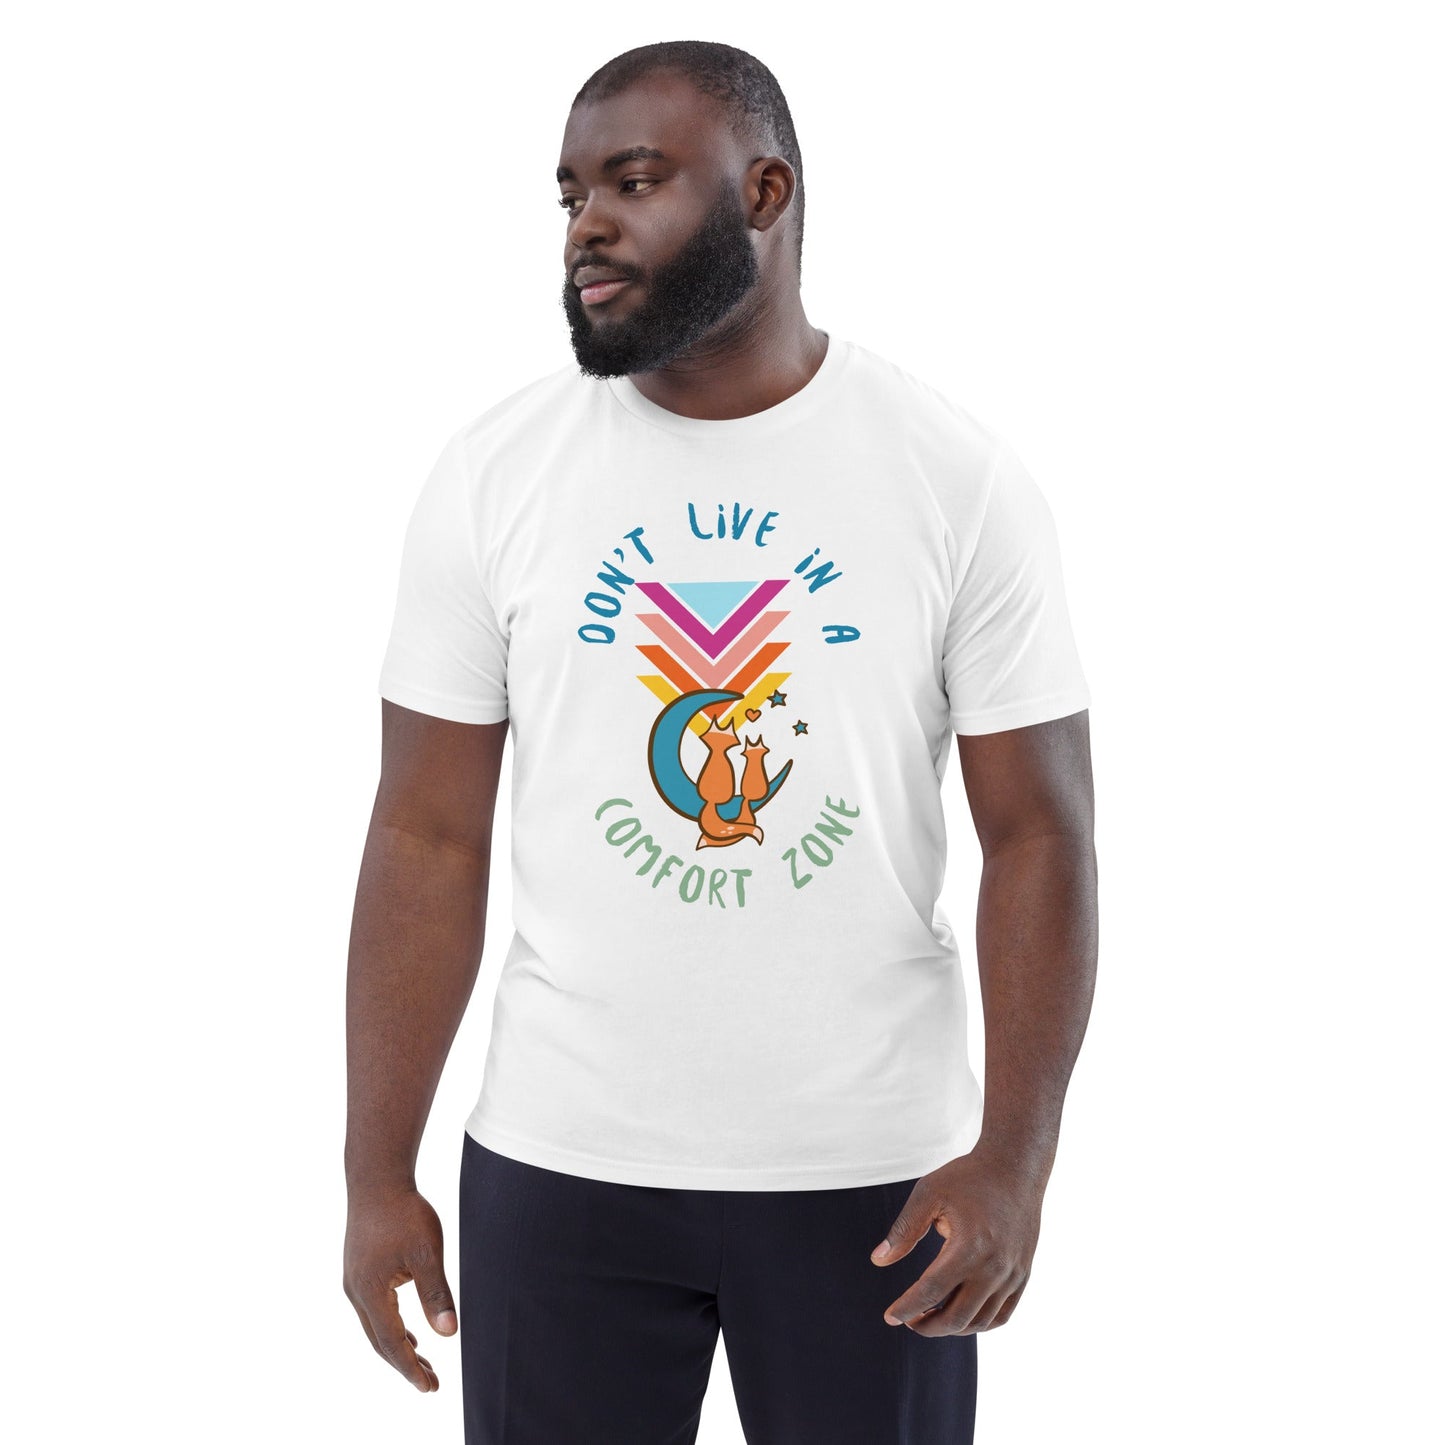 DON'T LIVE IN A COMFORT ZONE ORGANIC T-SHIRT-eco-friendly organic graphic t-shirt-White-S-mysticalcherry